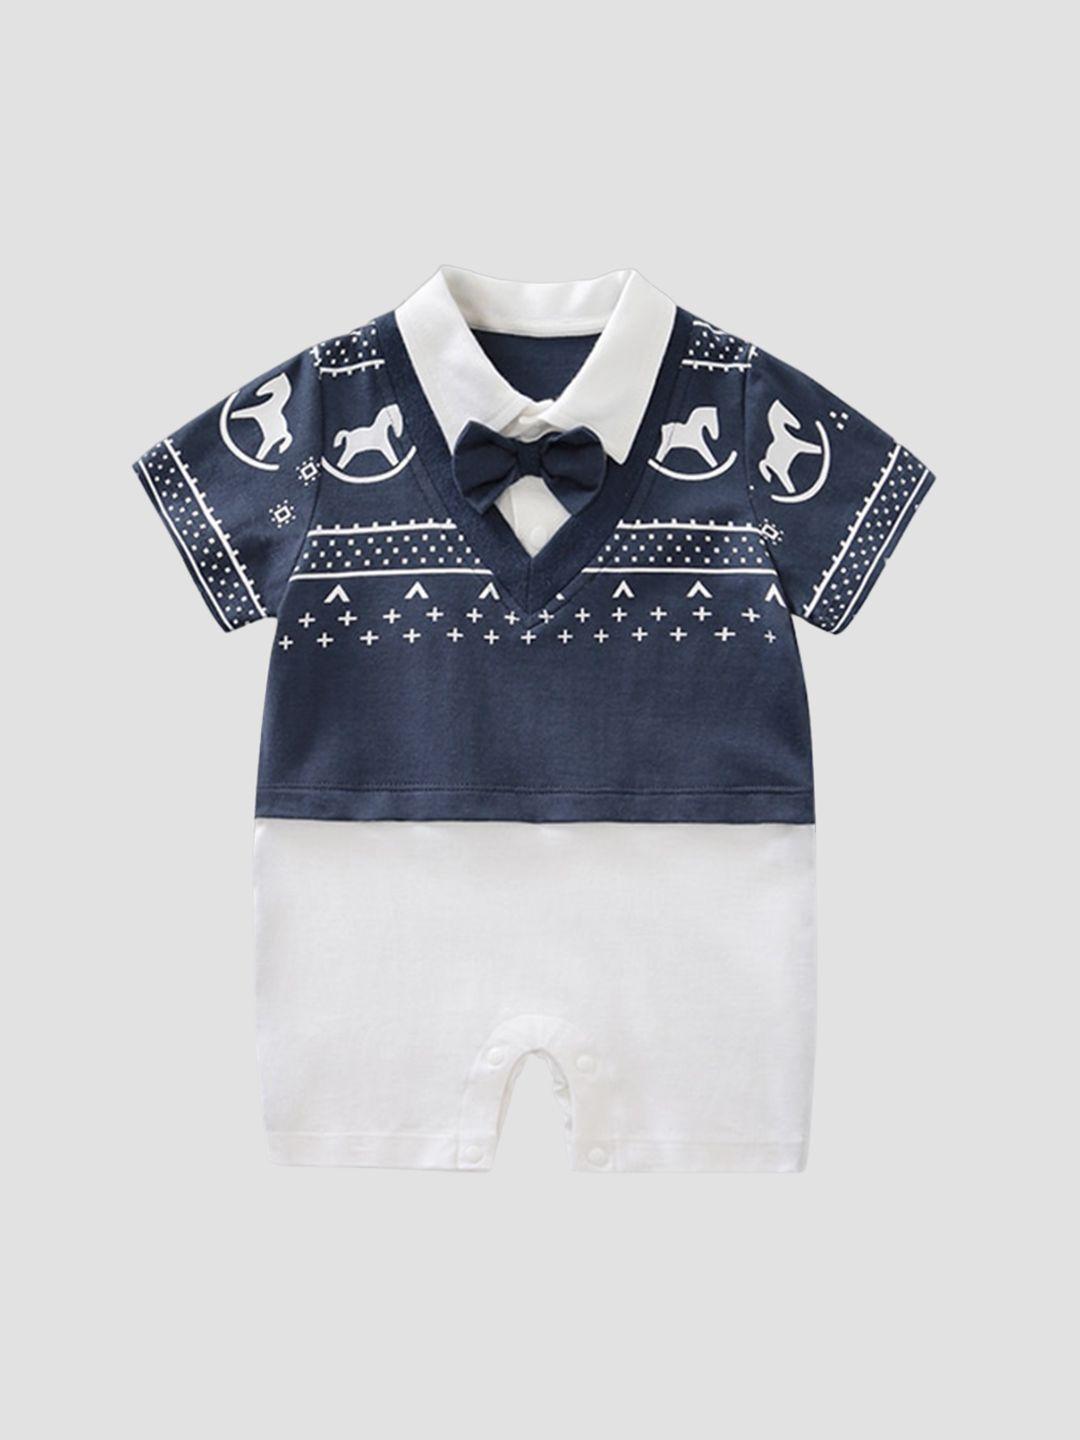 stylecast-infant-boys-navy-blue-conversational-printed-cotton-rompers